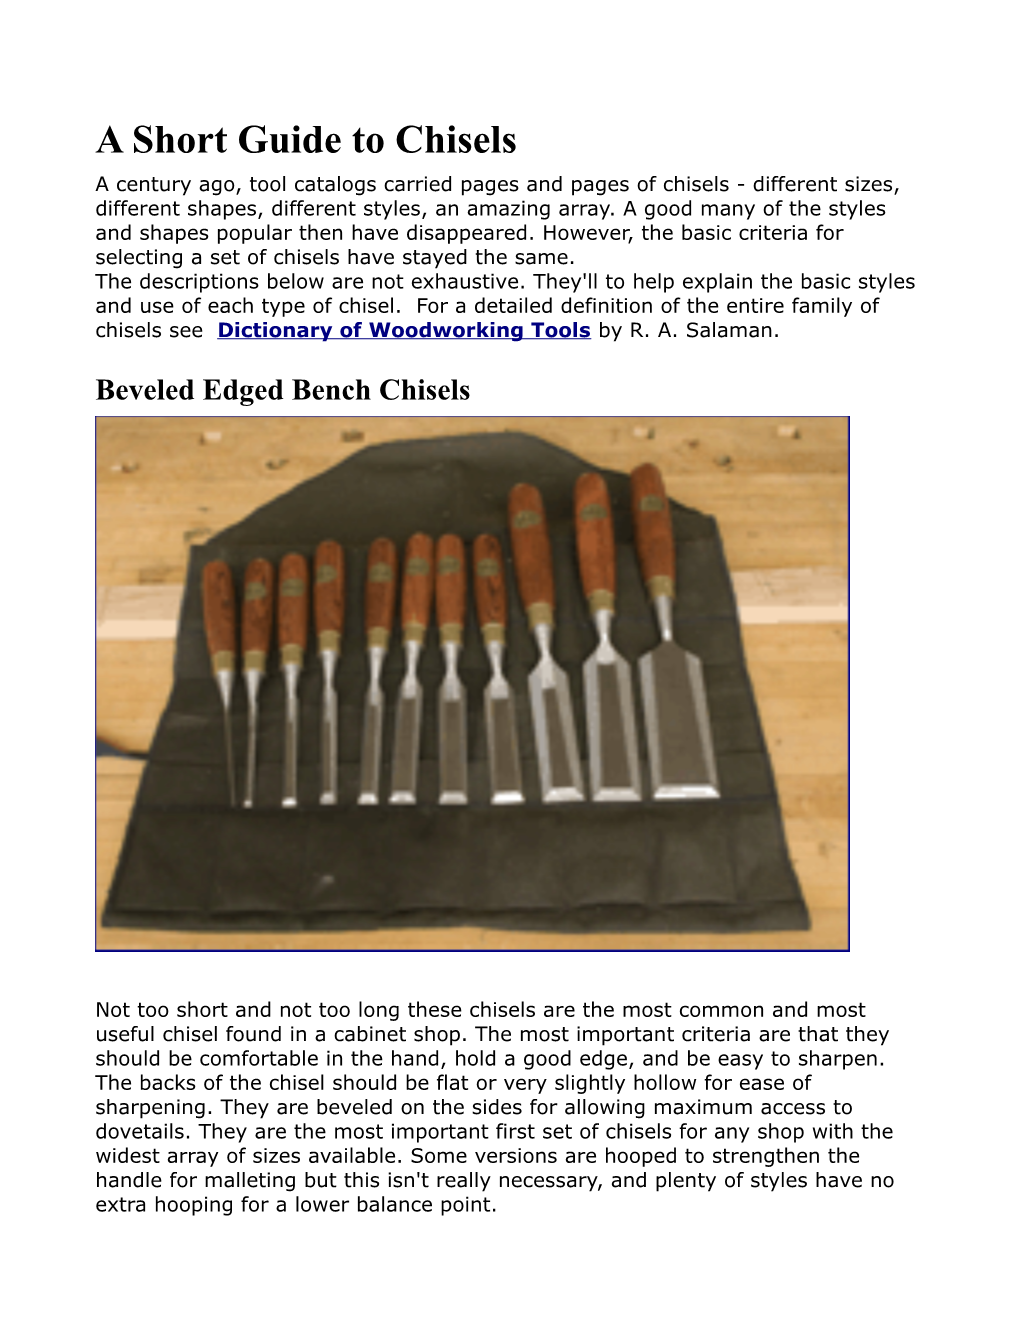 A Short Guide to Chisels a Century Ago, Tool Catalogs Carried Pages and Pages of Chisels - Different Sizes, Different Shapes, Different Styles, an Amazing Array